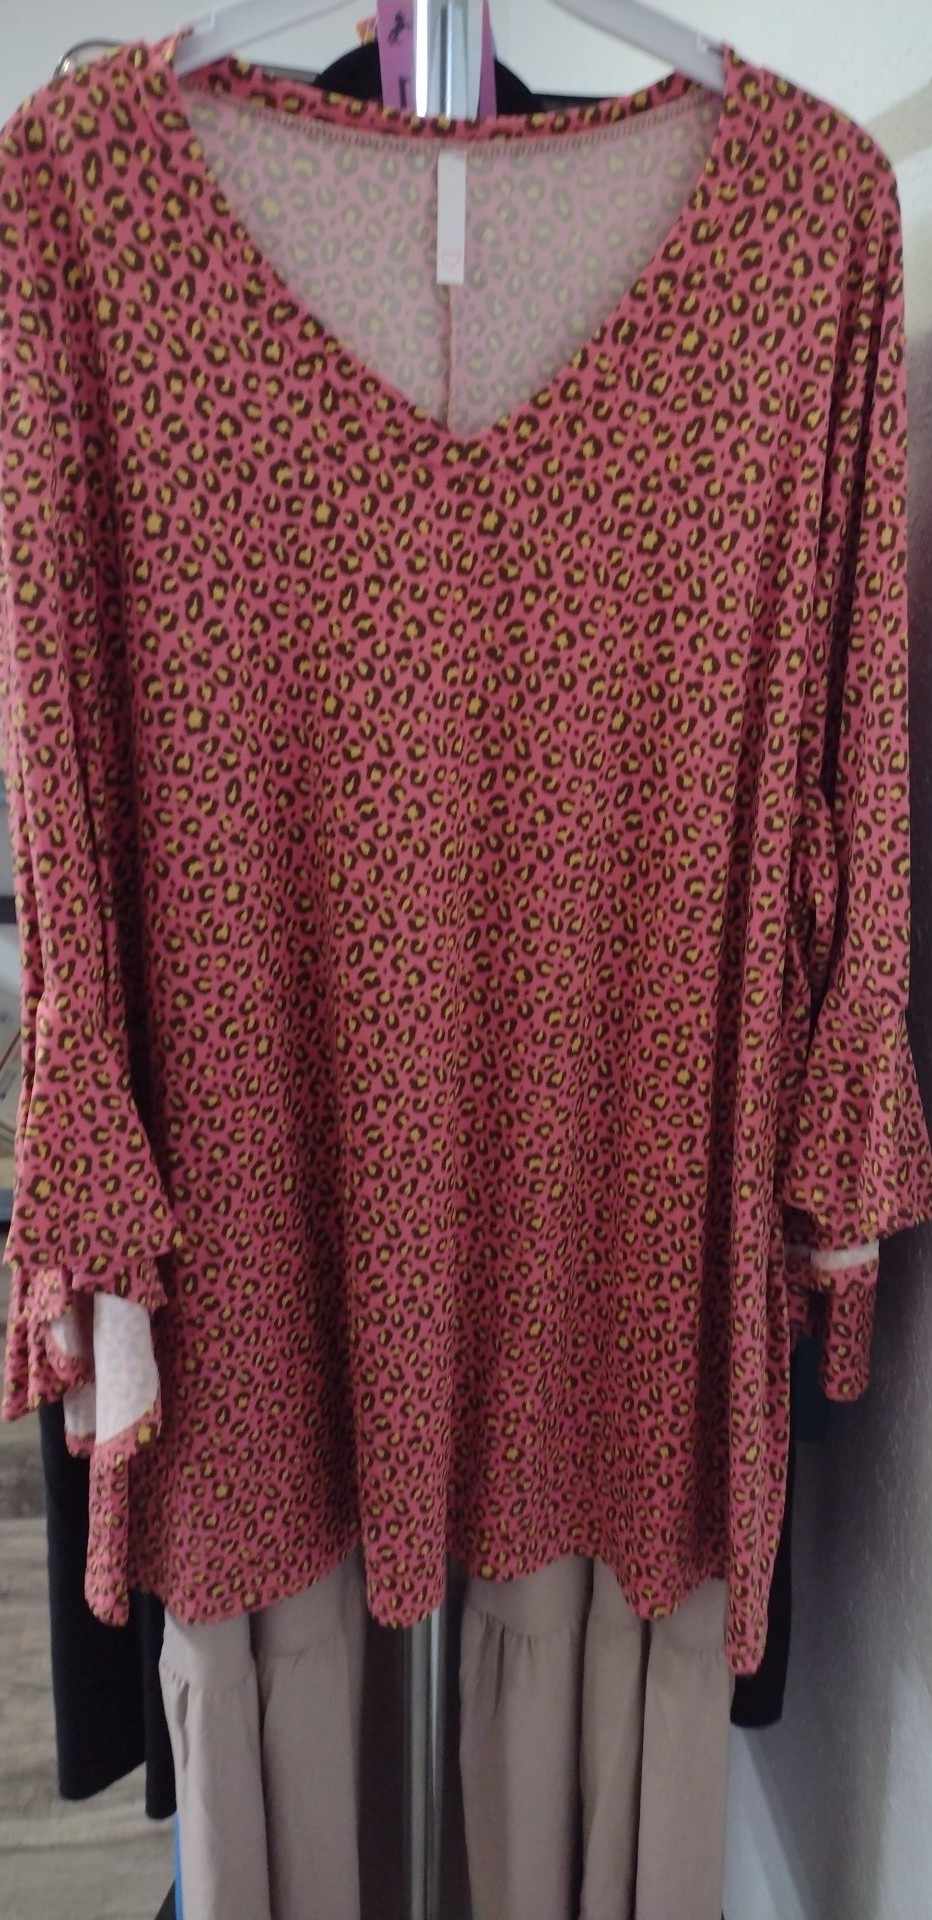 Pink Leopard Shirt Top w Majestic Sleeves